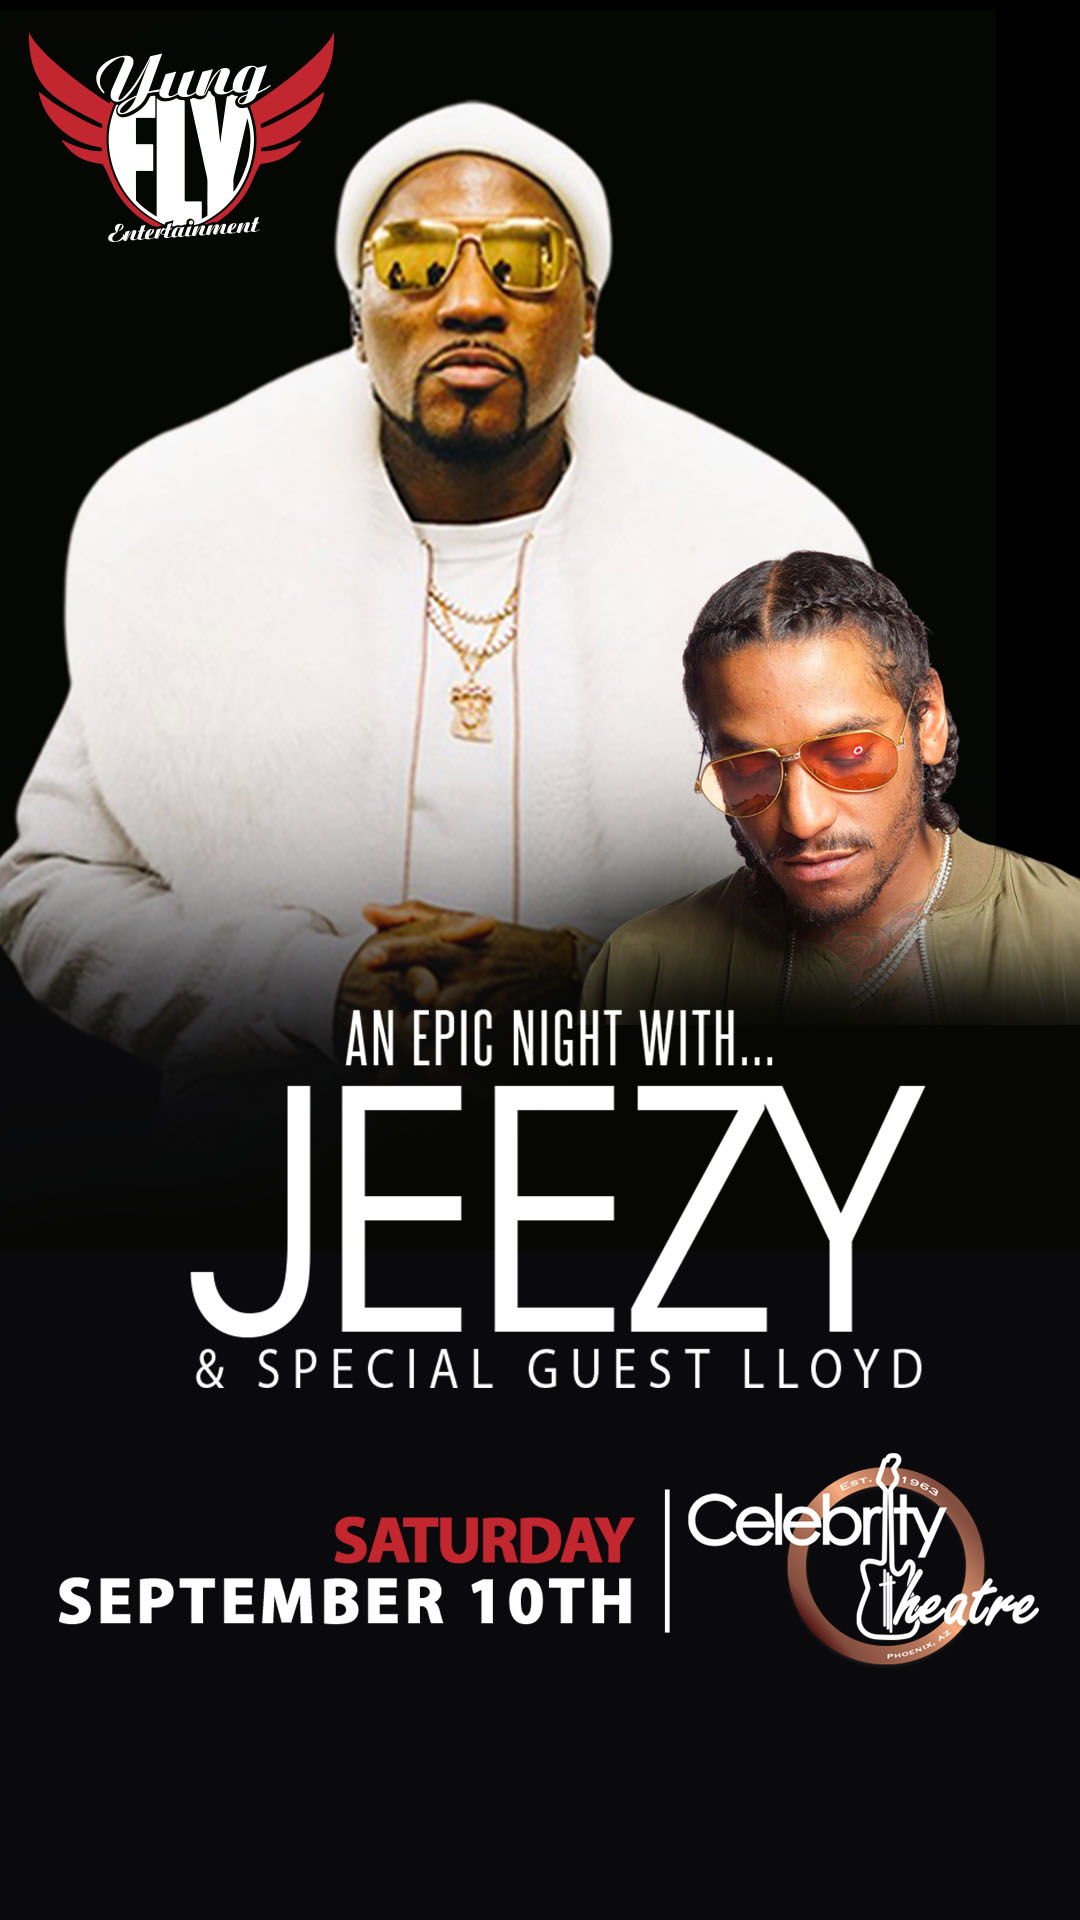 Rapper Jeezy, R&B Singer Lloyd Coming to Phoenix’s Celebrity Theatre on September 10 for an Epic Night